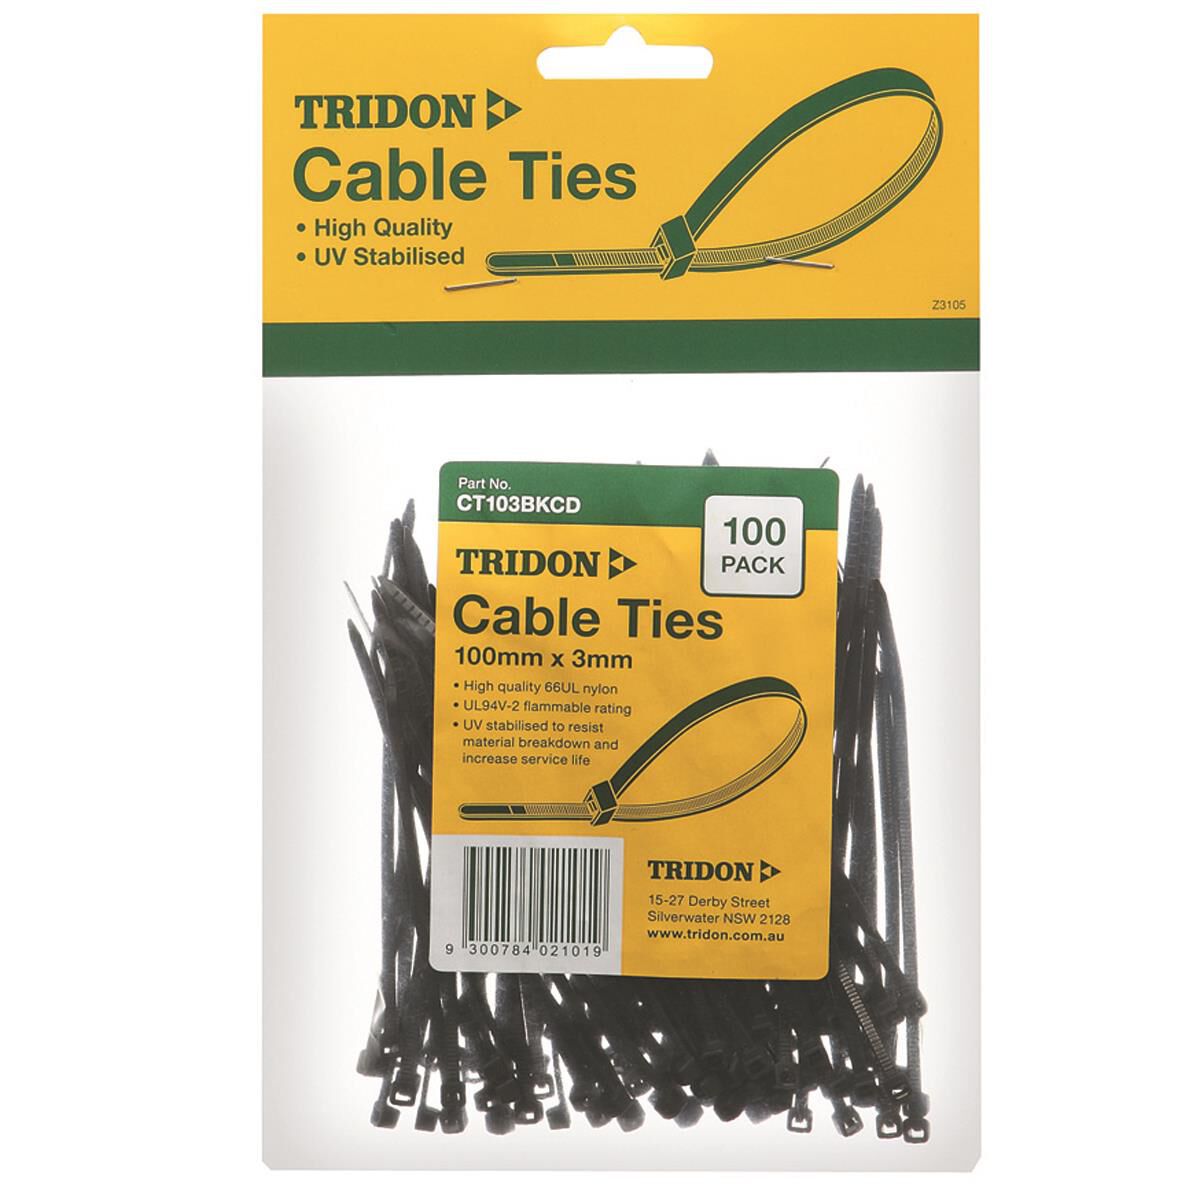 Tridon Cable Ties - Black, 100mm x 3mm, 100 Pack, , scaau_hi-res